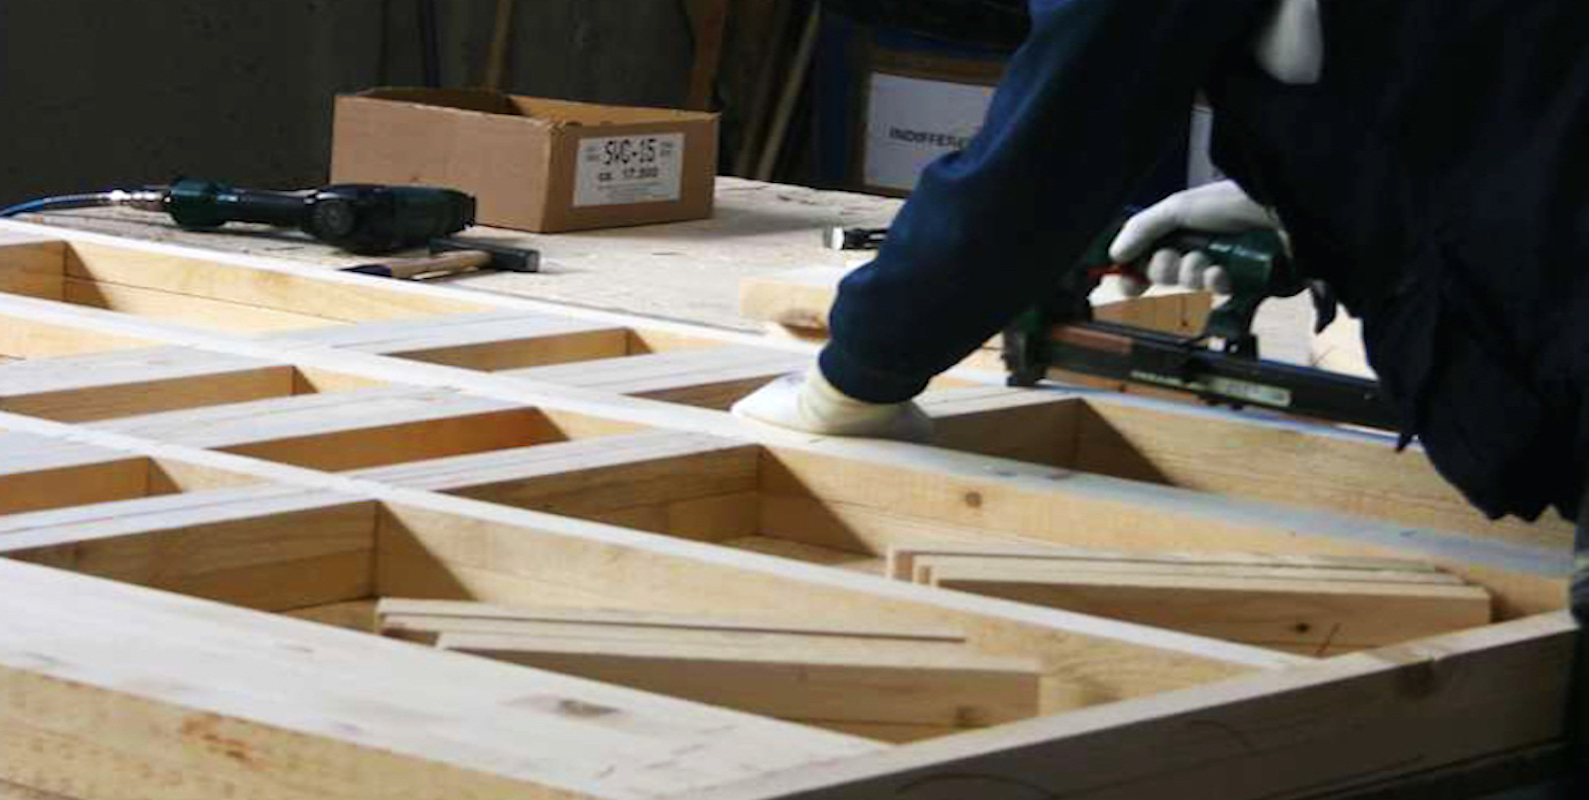 production of semi-finished components for mobile homes